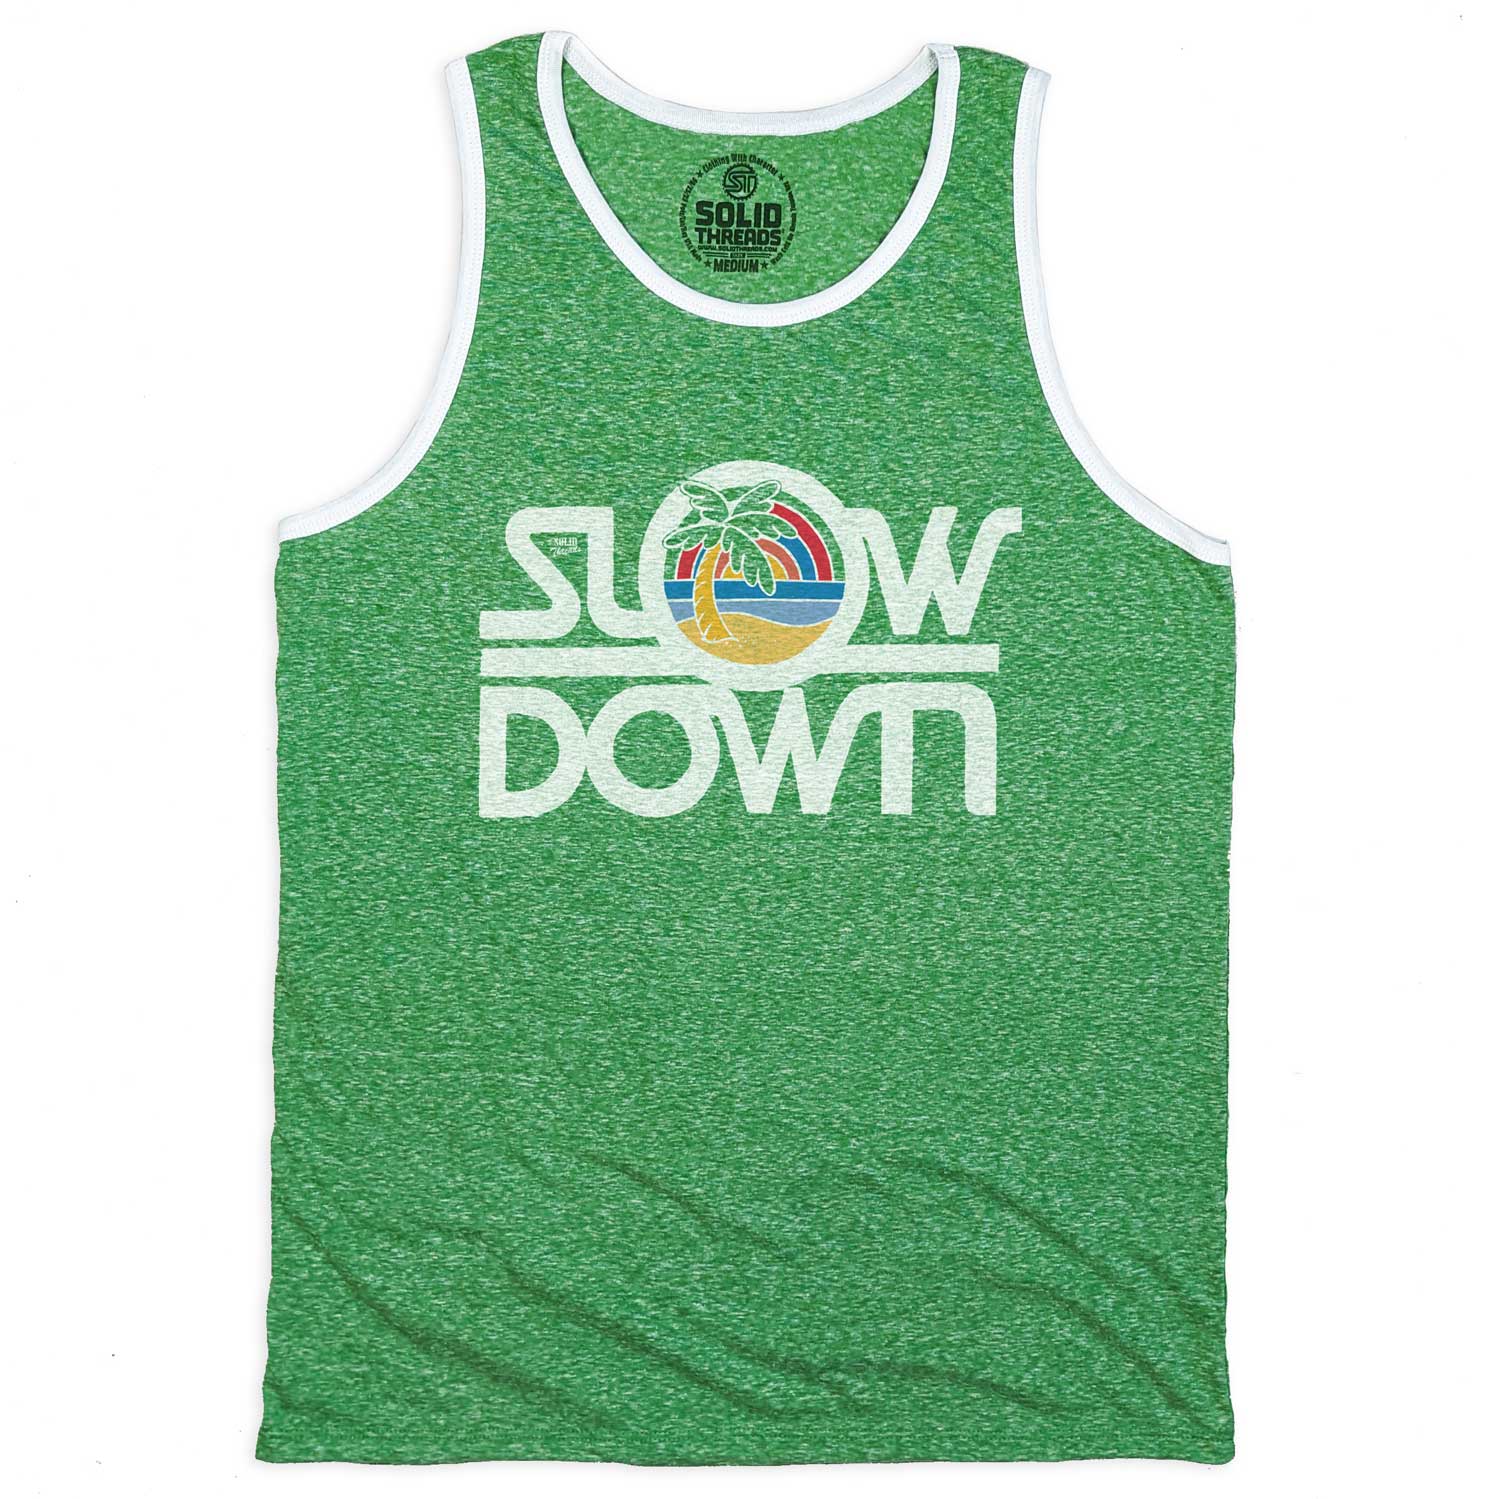 Men's Slow Down Vintage Graphic Tank Top | Retro Beach Vacation Sleeveless Shirt | Solid Threads